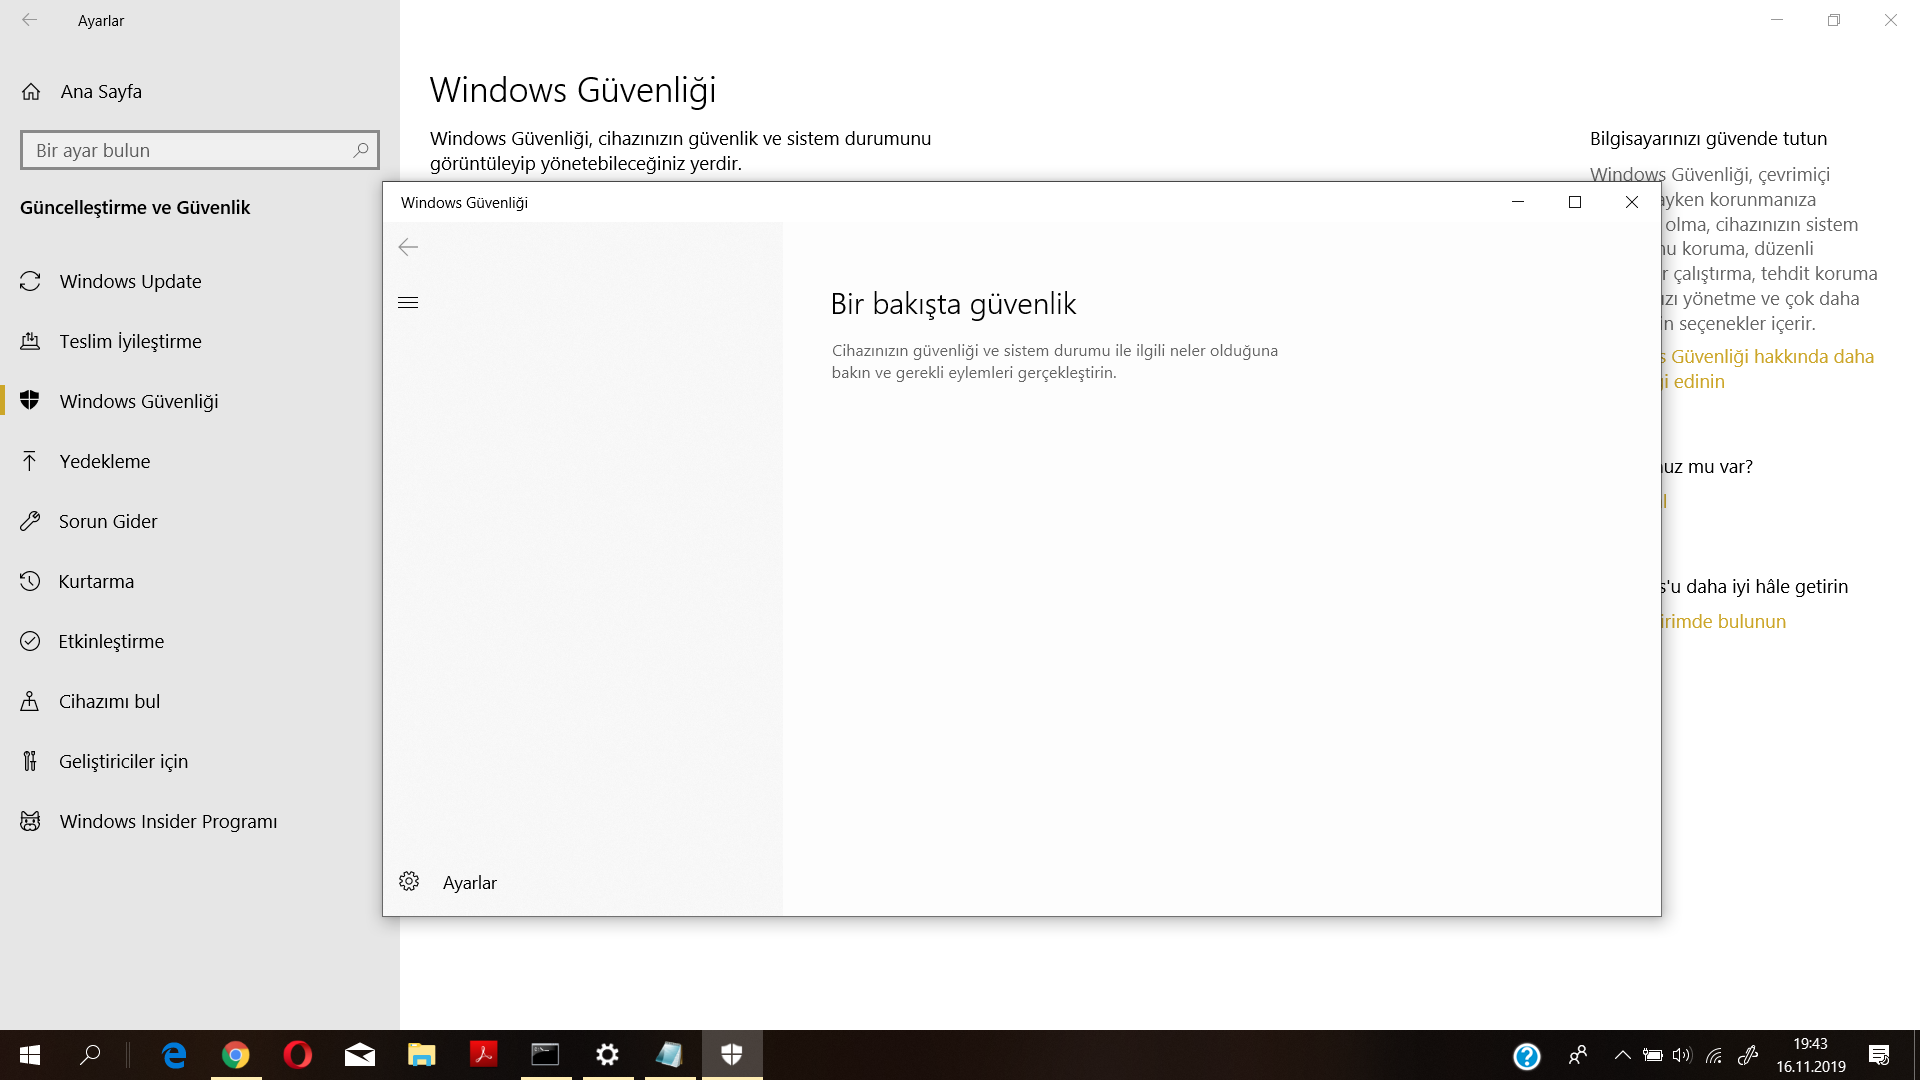 Windows Security does not work! f6cb3b92-8a60-479d-885b-51850047e3f1?upload=true.png